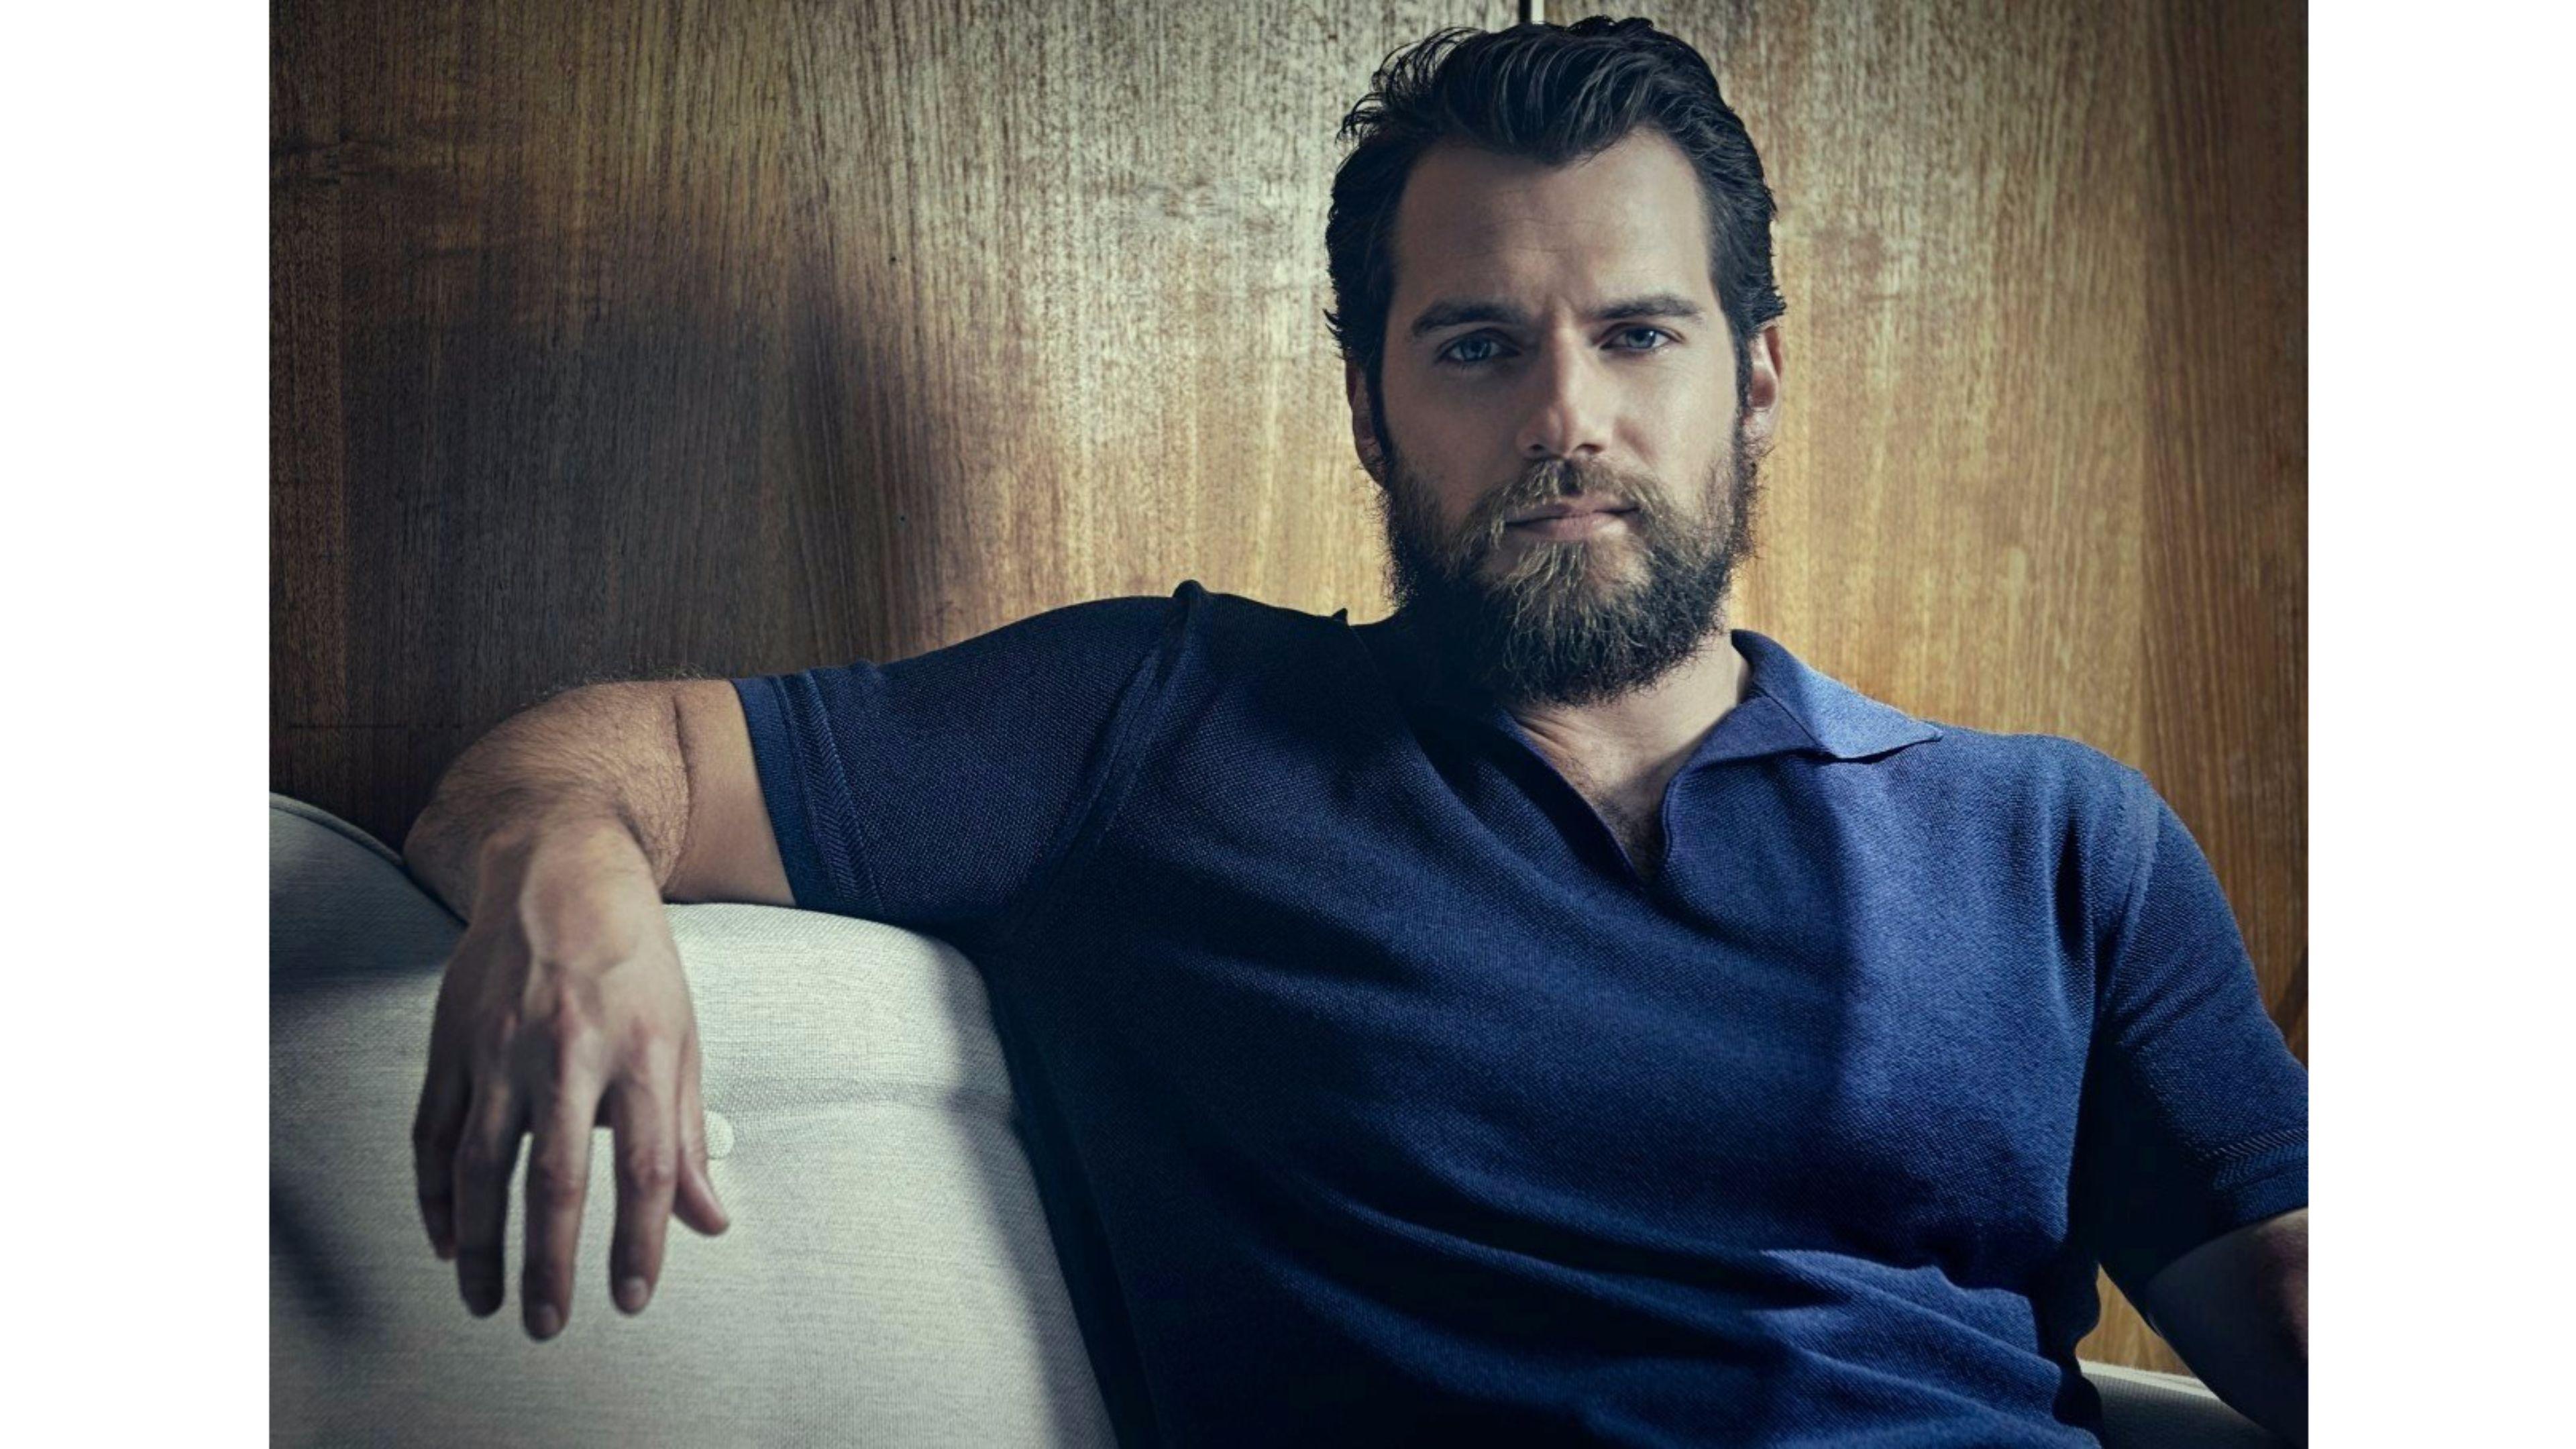 APPRECIATION: A few of my favorite wallpapers of Henry Cavill